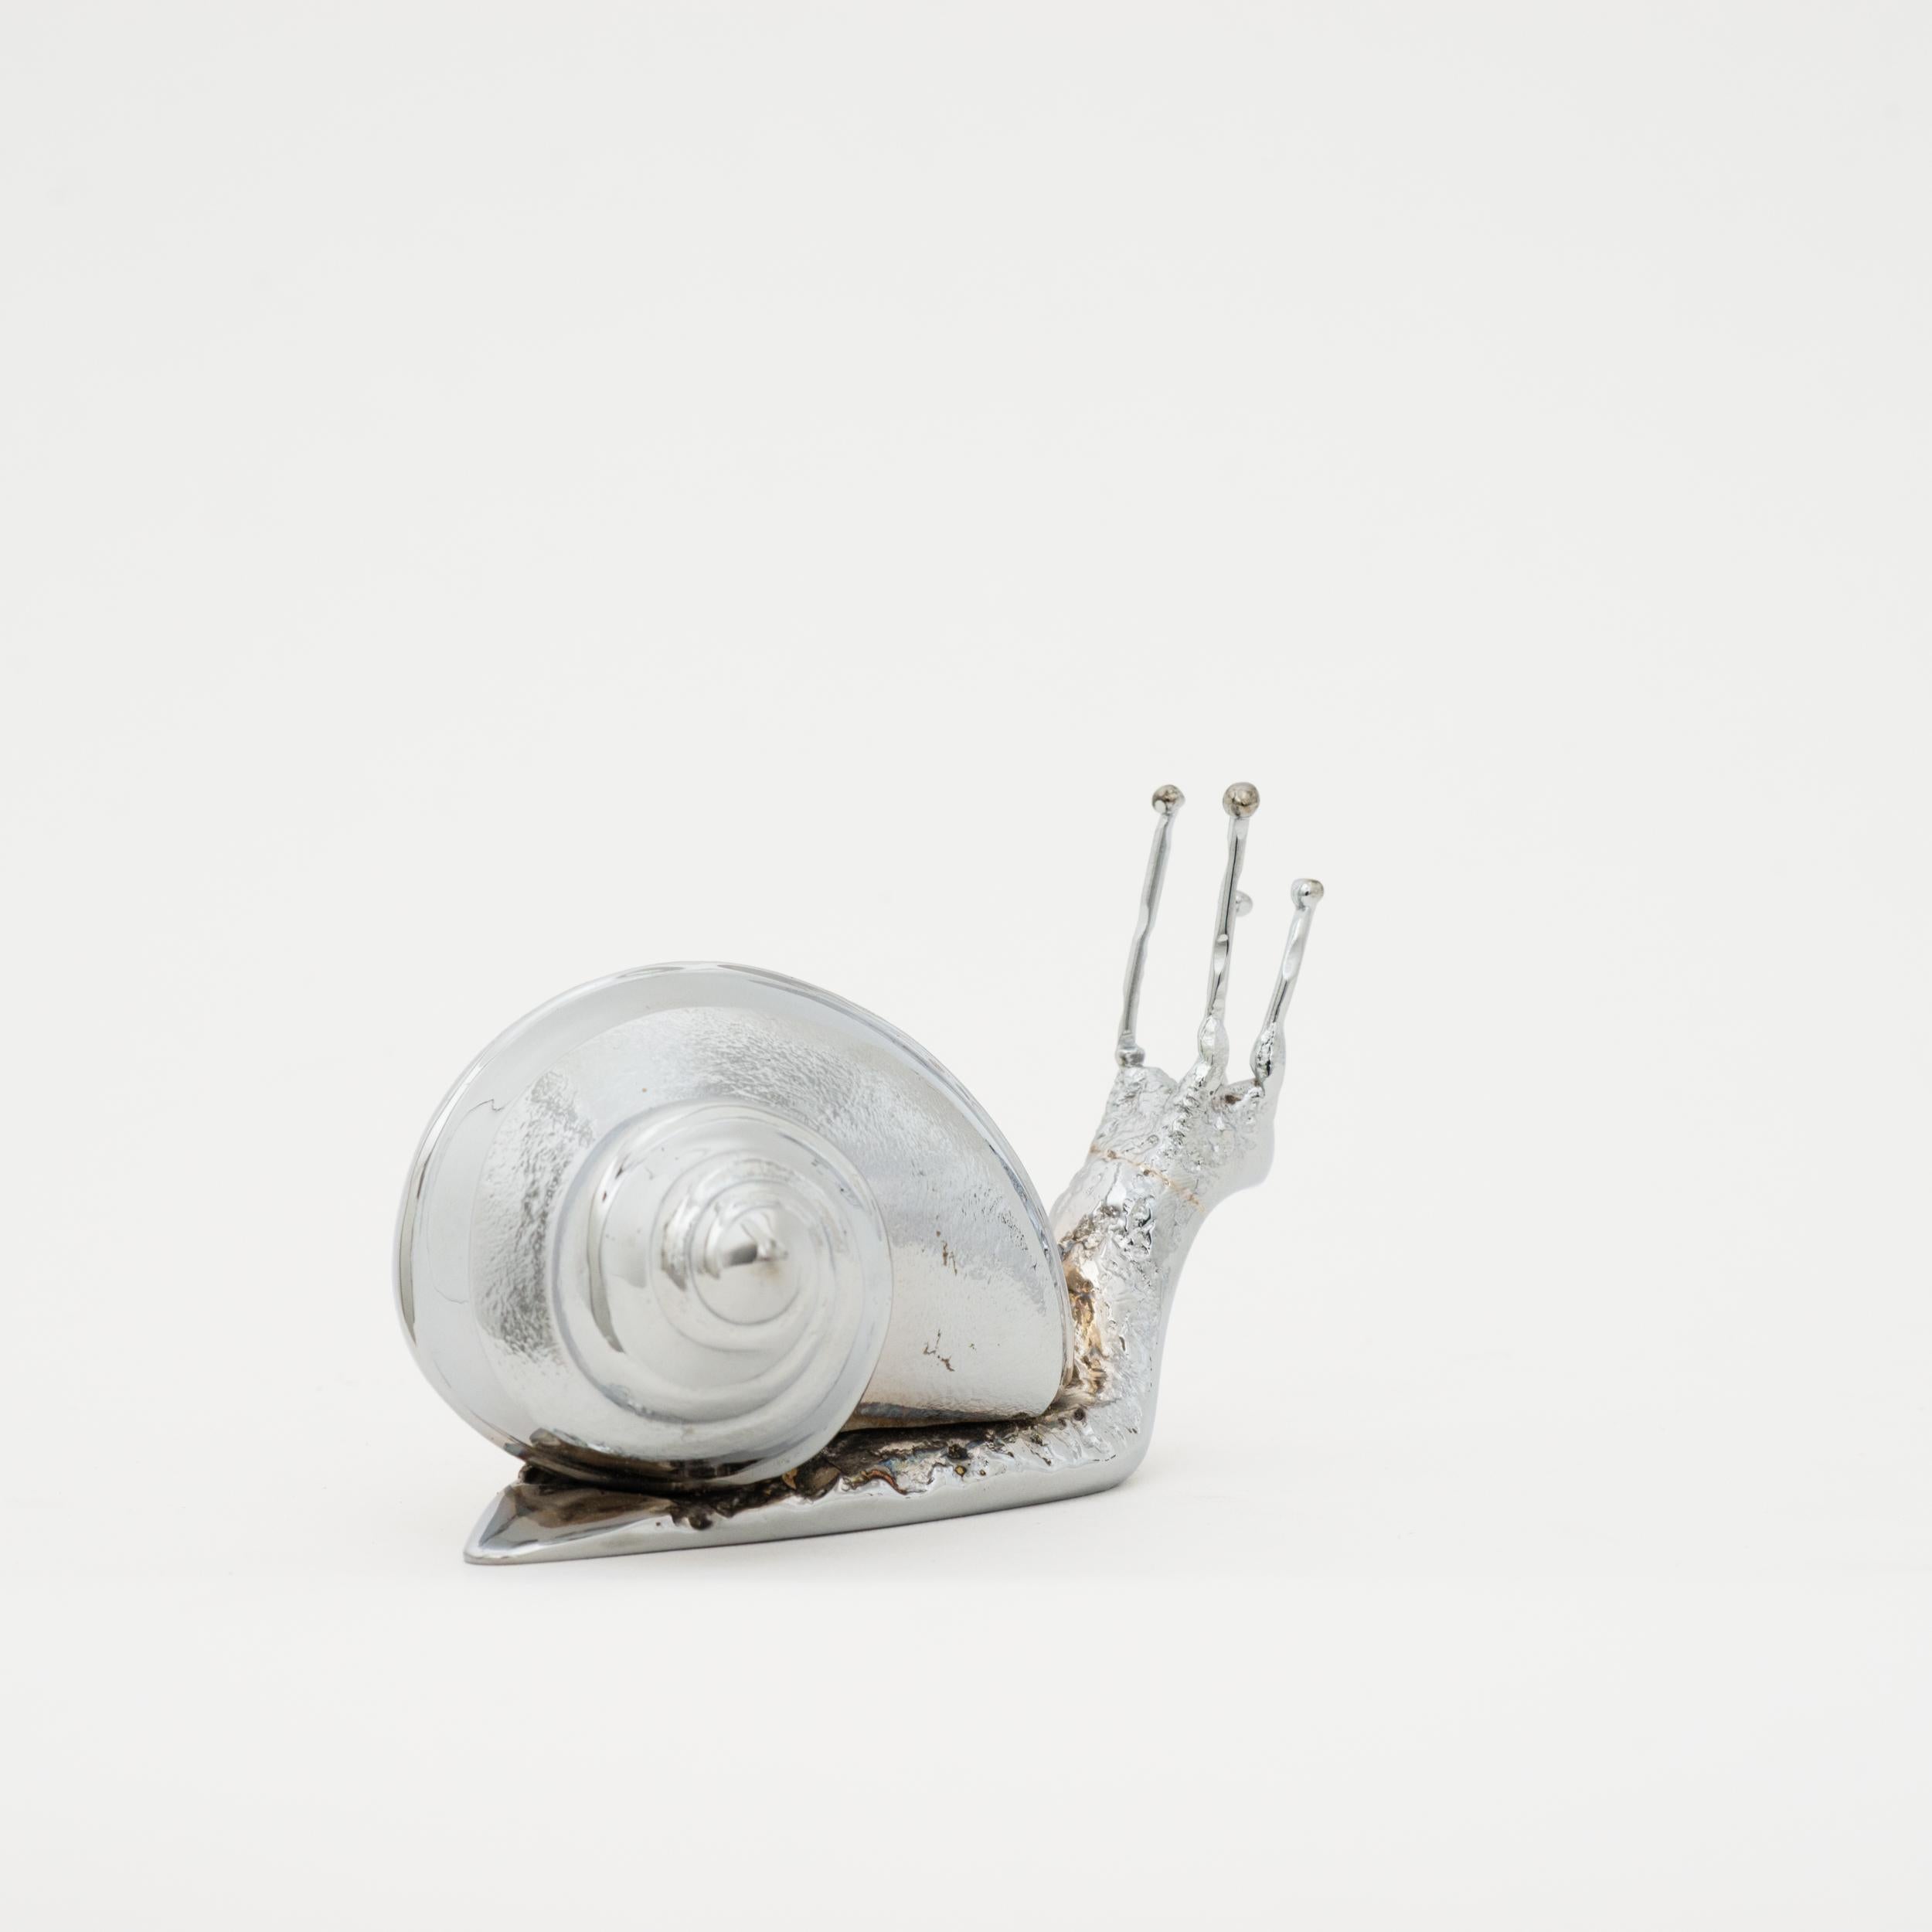 Indian Handmade Nickel Plated Decorative Snail, Paperweight For Sale